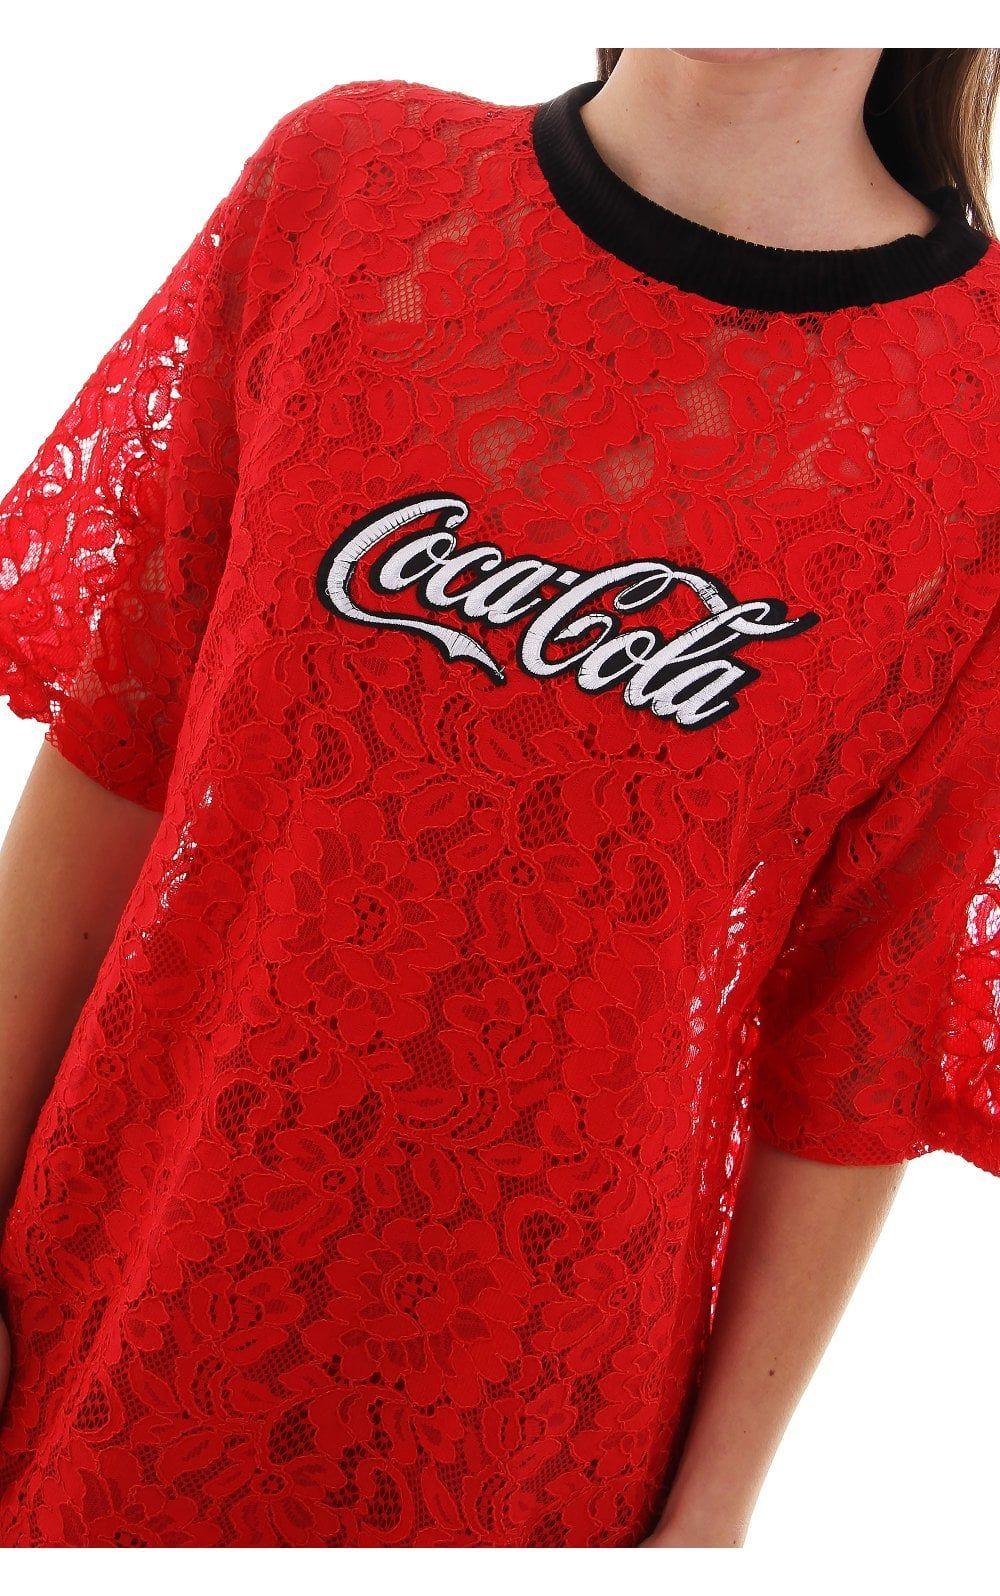 Red House Clothing Logo - House Of Stars House Of Stars Coca Cola Lace T Shirt Dress With Logo ...